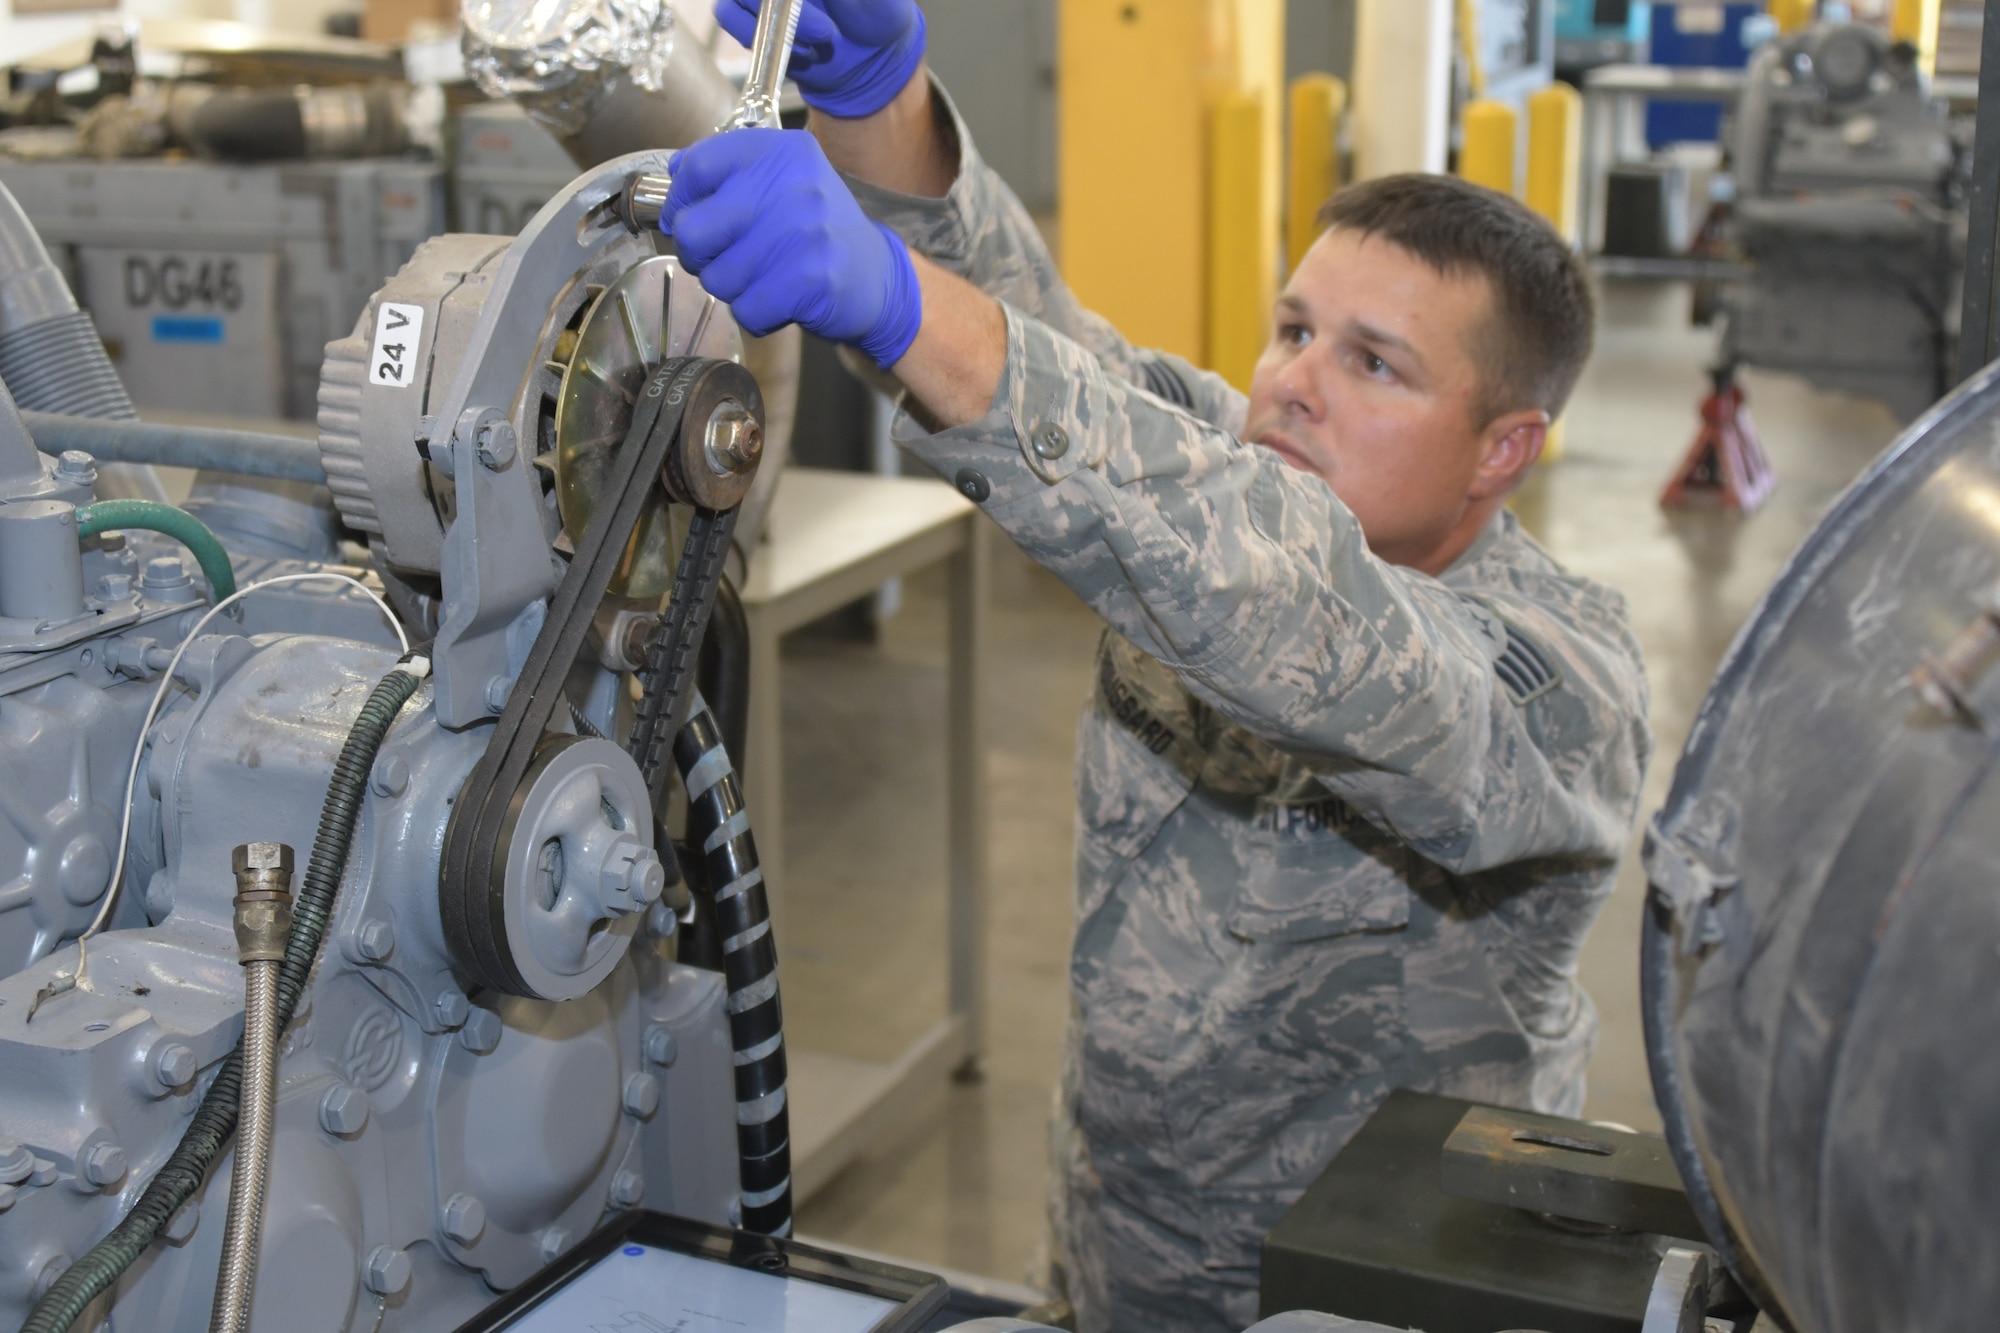 U.S. Air Force Staff Sgt. Justin Broussard, 116th Maintenance Group, 116th Air Control Wing, Georgia Air National Guard, works on aerospace ground equipment at Robins Air Force Base, Georgia, Oct. 1, 2019. Broussard will be representing Team USA in golf at the 7th CISM World Games in Wuhan, China. U.S. Air National Guard photo by Barry Bena.